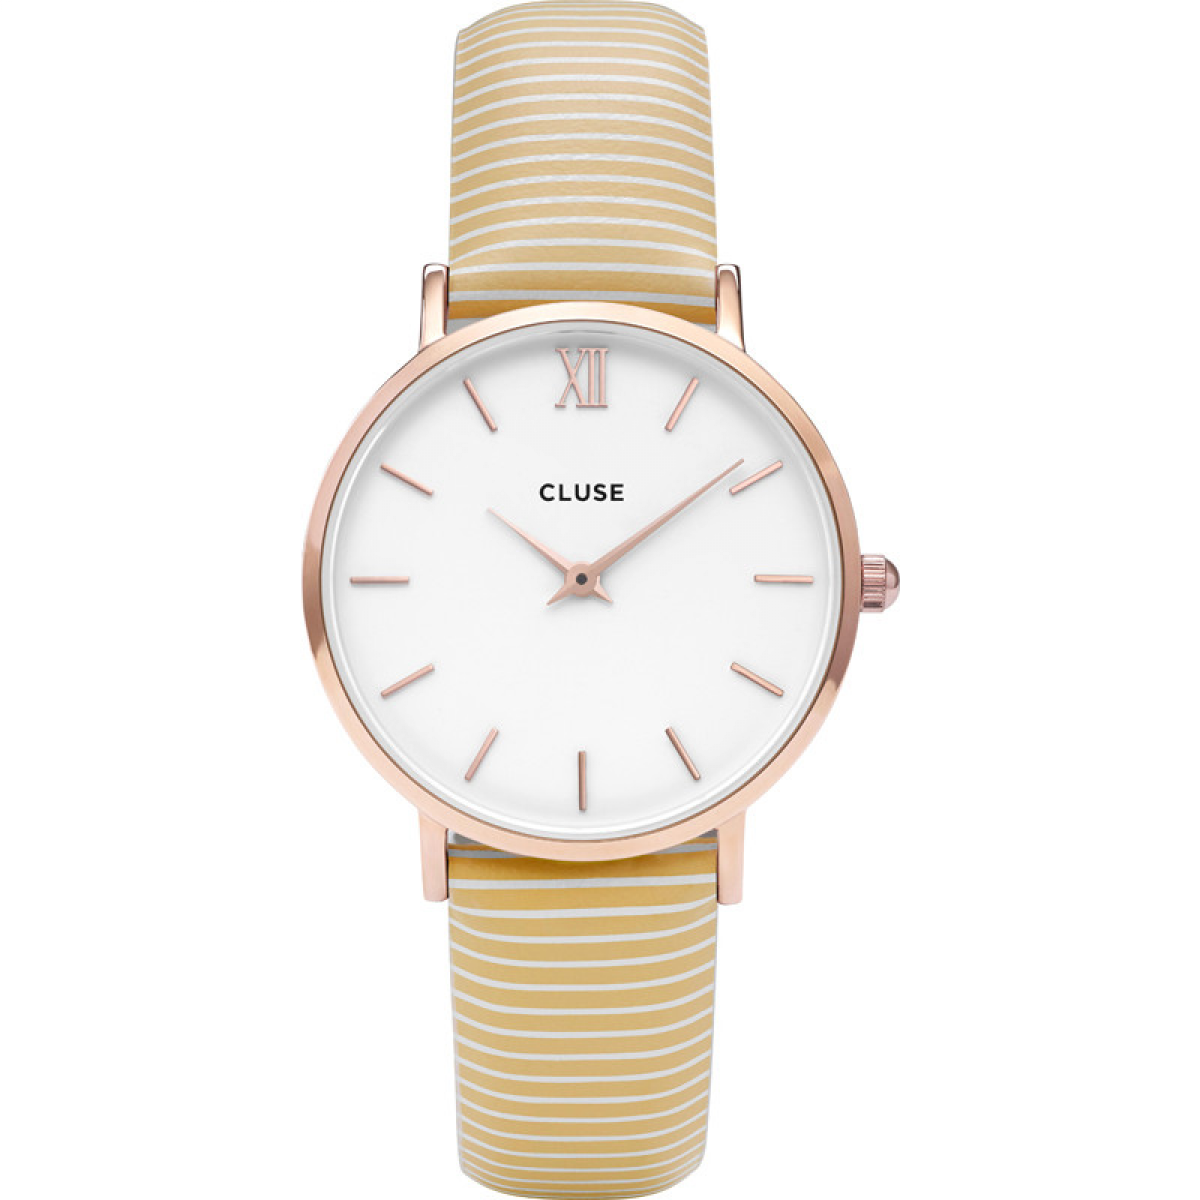 CLUSE MINUIT ROSE GOLD WHITE/SUNNY YELLOW STRIPES CLUSE